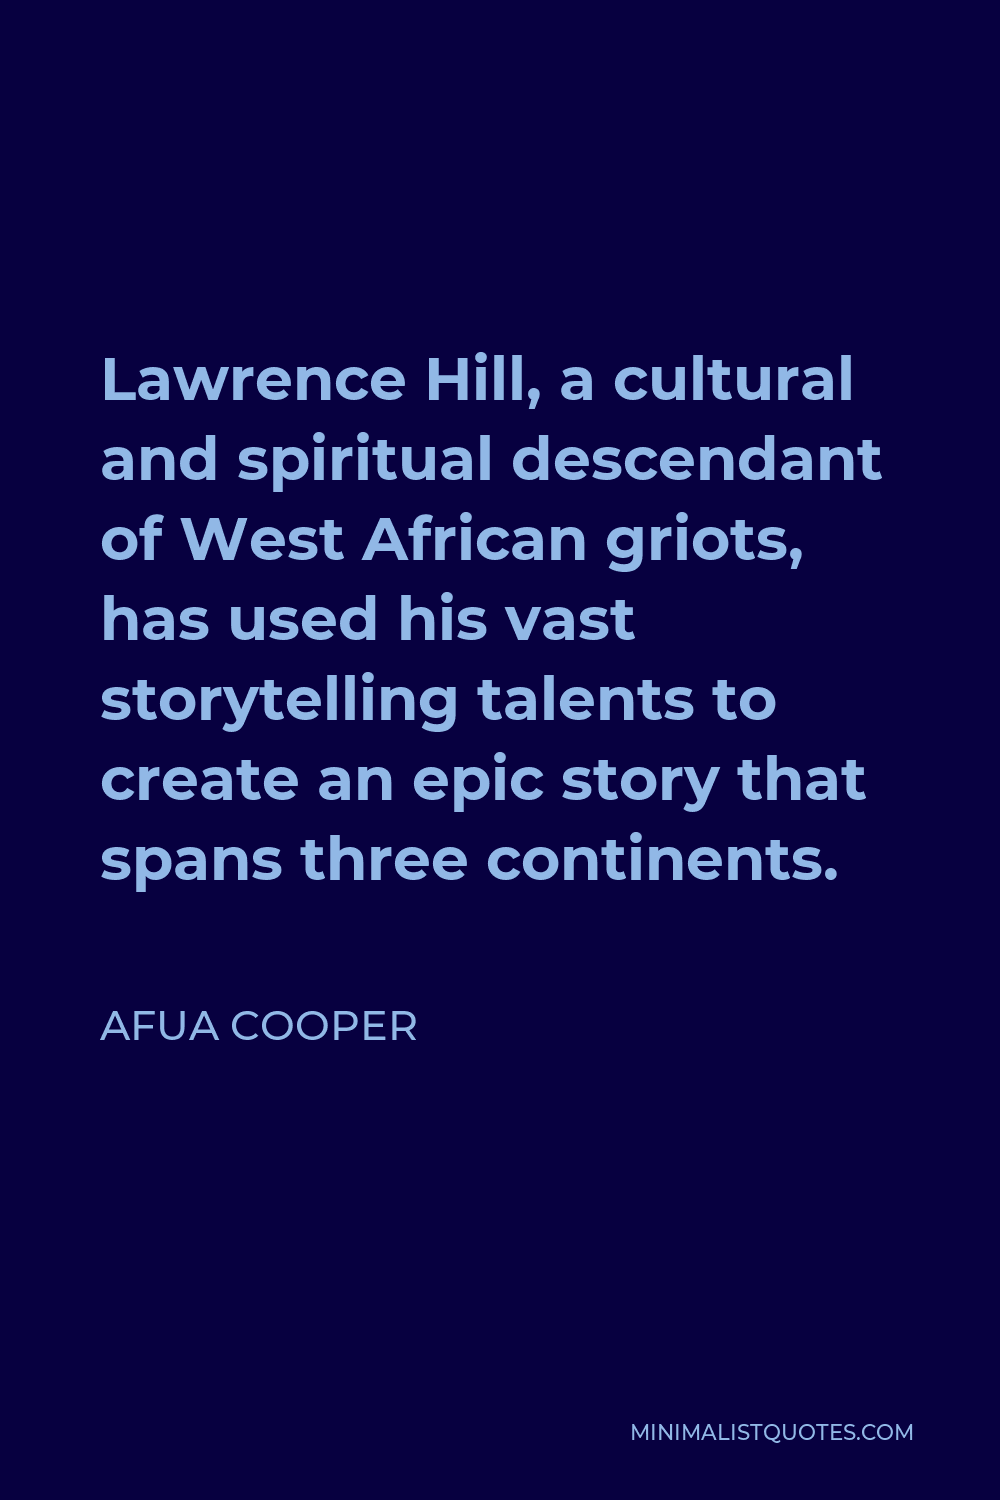 Afua Cooper Quote - Lawrence Hill, a cultural and spiritual descendant of West African griots, has used his vast storytelling talents to create an epic story that spans three continents.